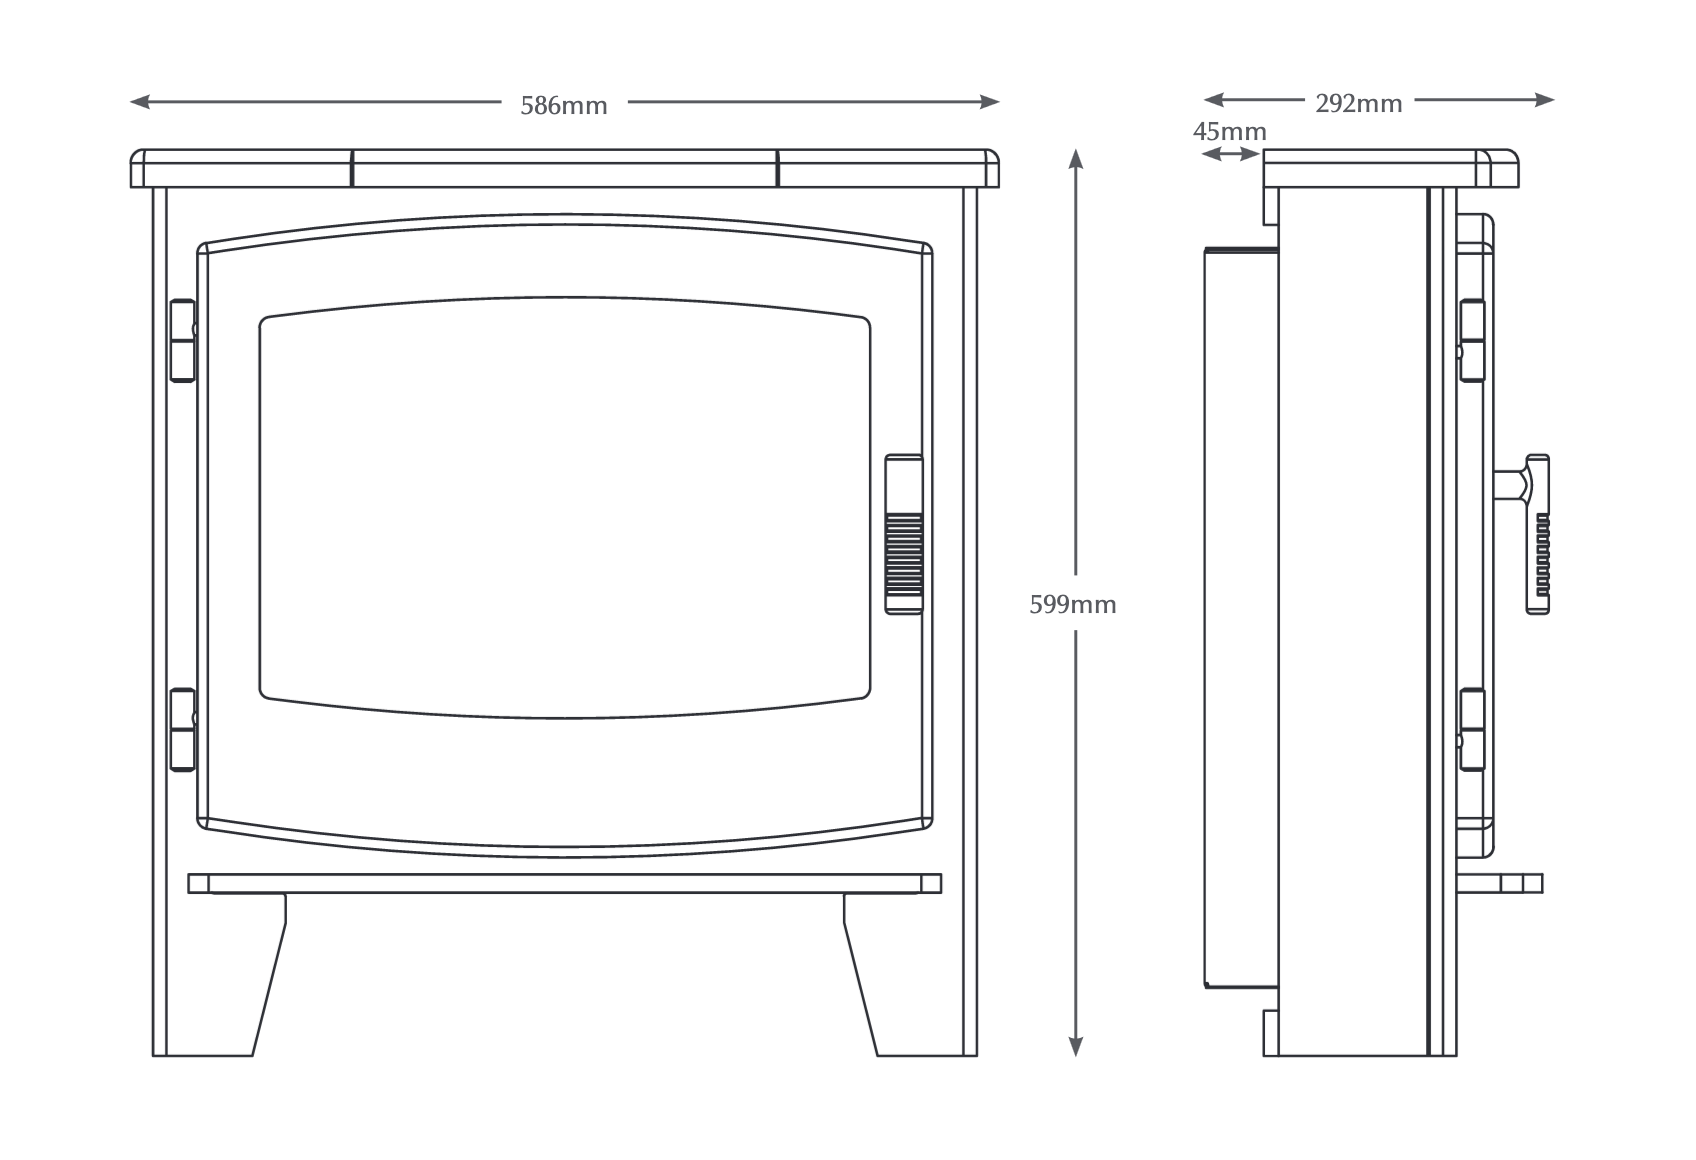 Elgin & Hall Beacon Large Inset Stove Dimensions